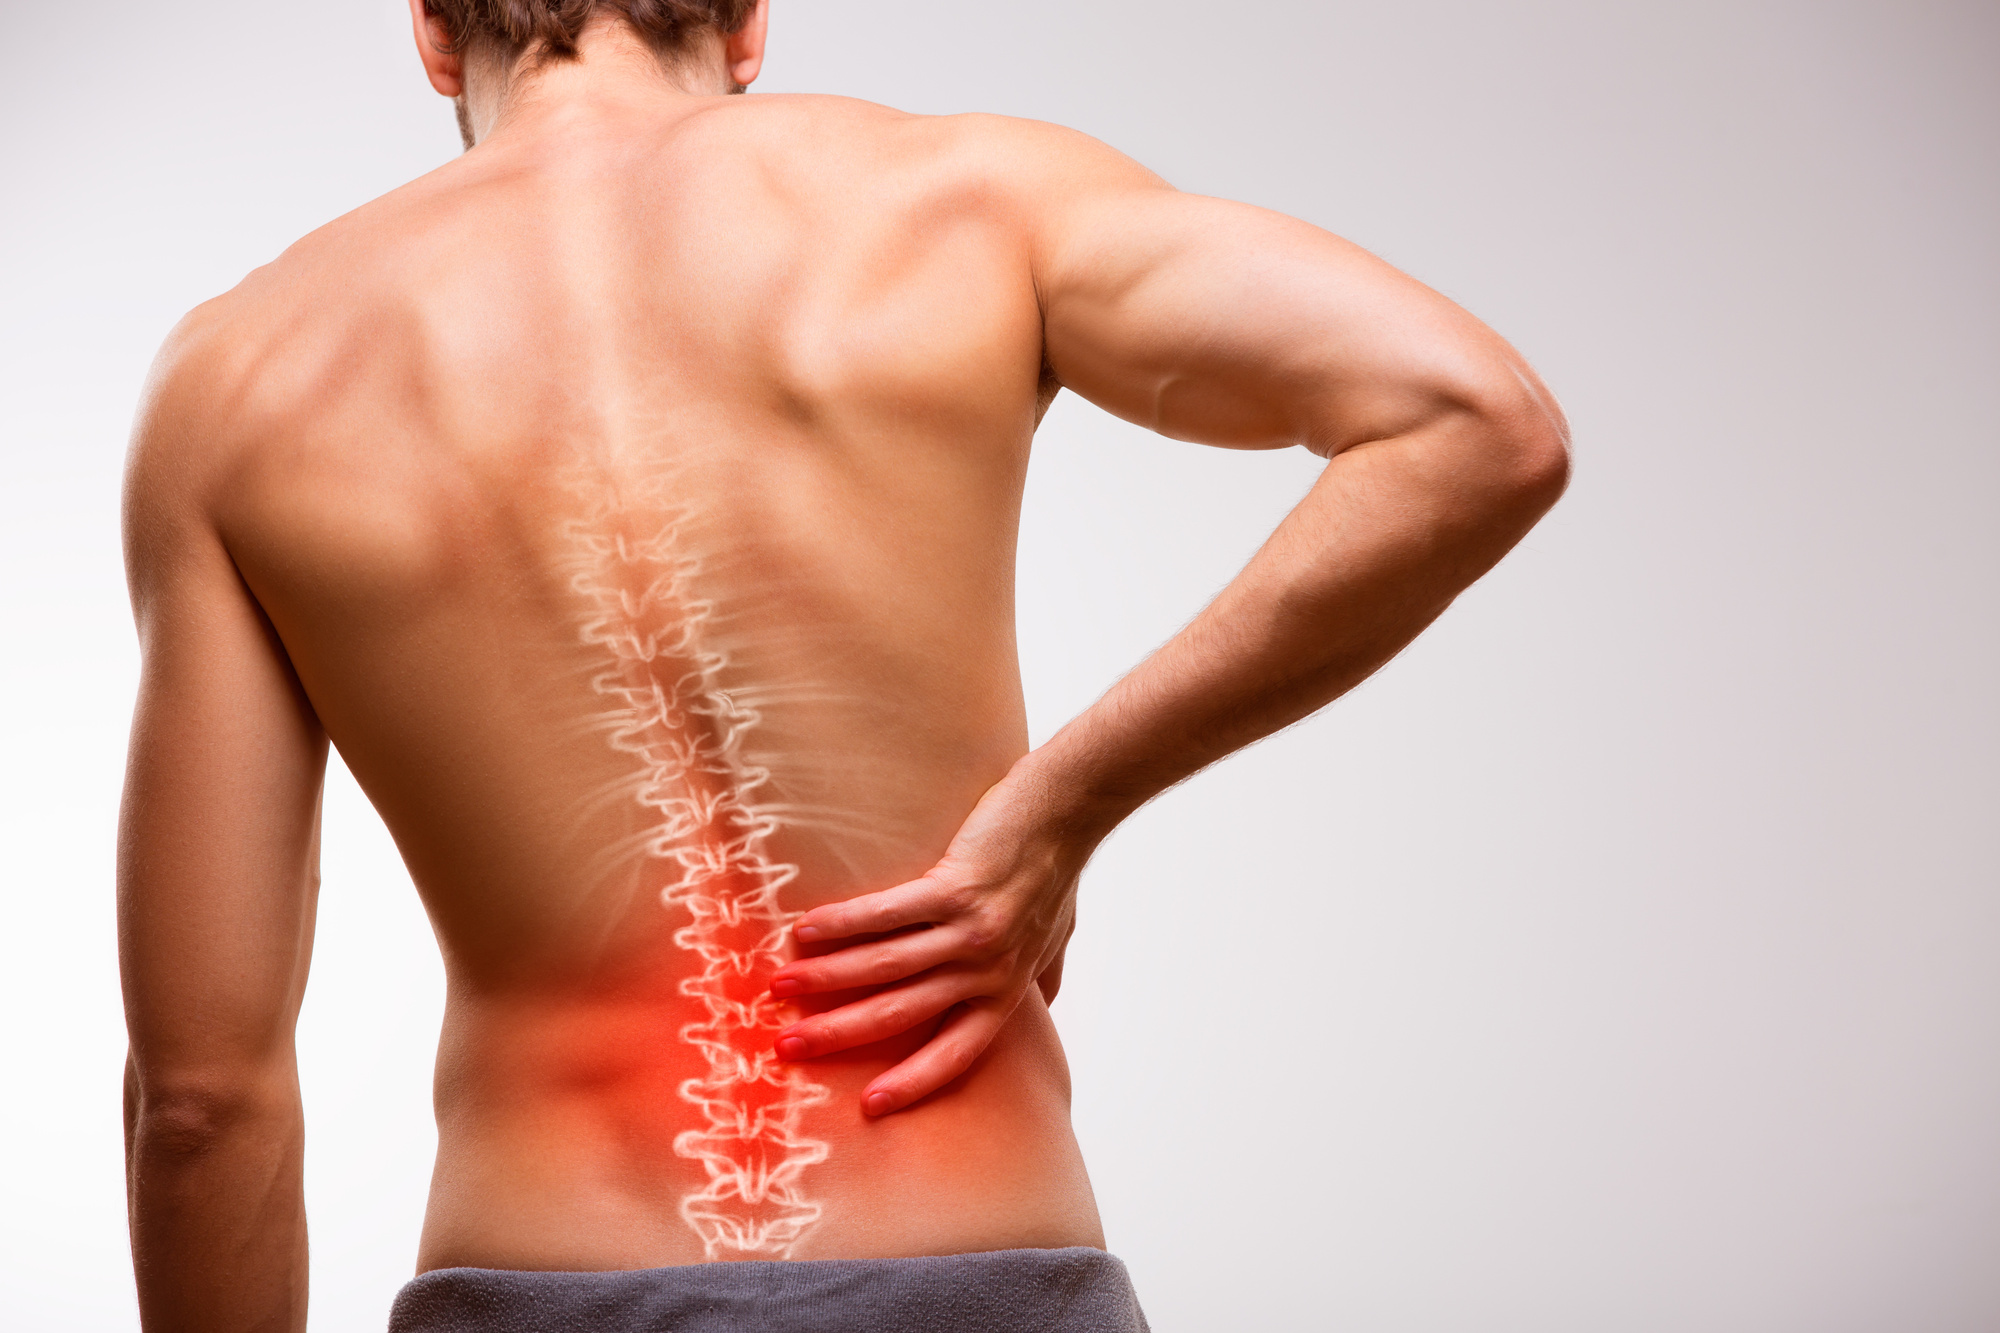 Are you experiencing uncomfortable lower back and spine pain? Here's what you need to know about what might be causing these issues.